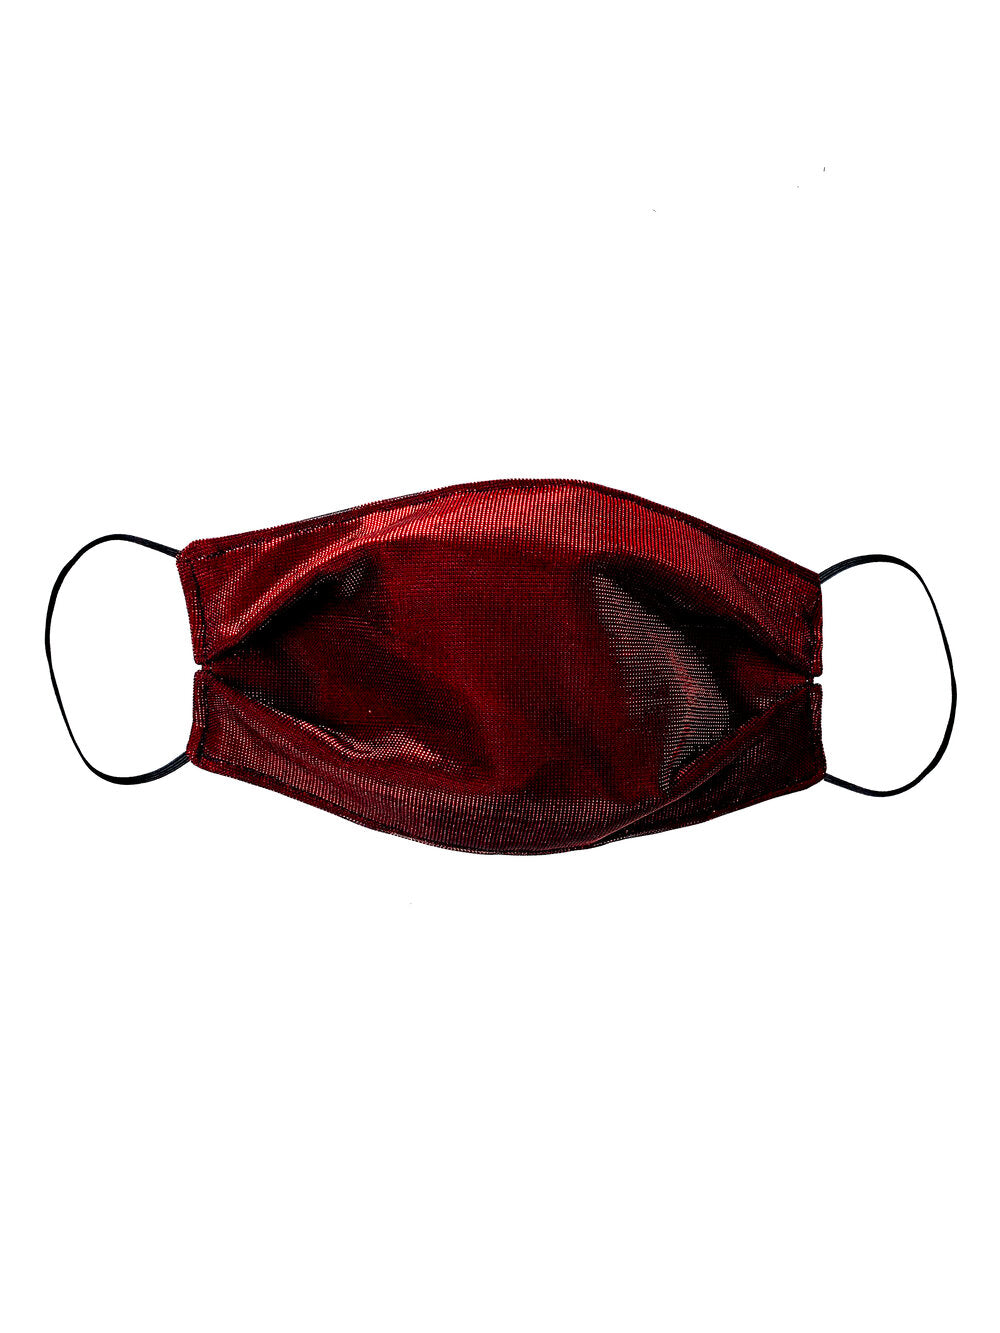 Close up metallic red protective mask